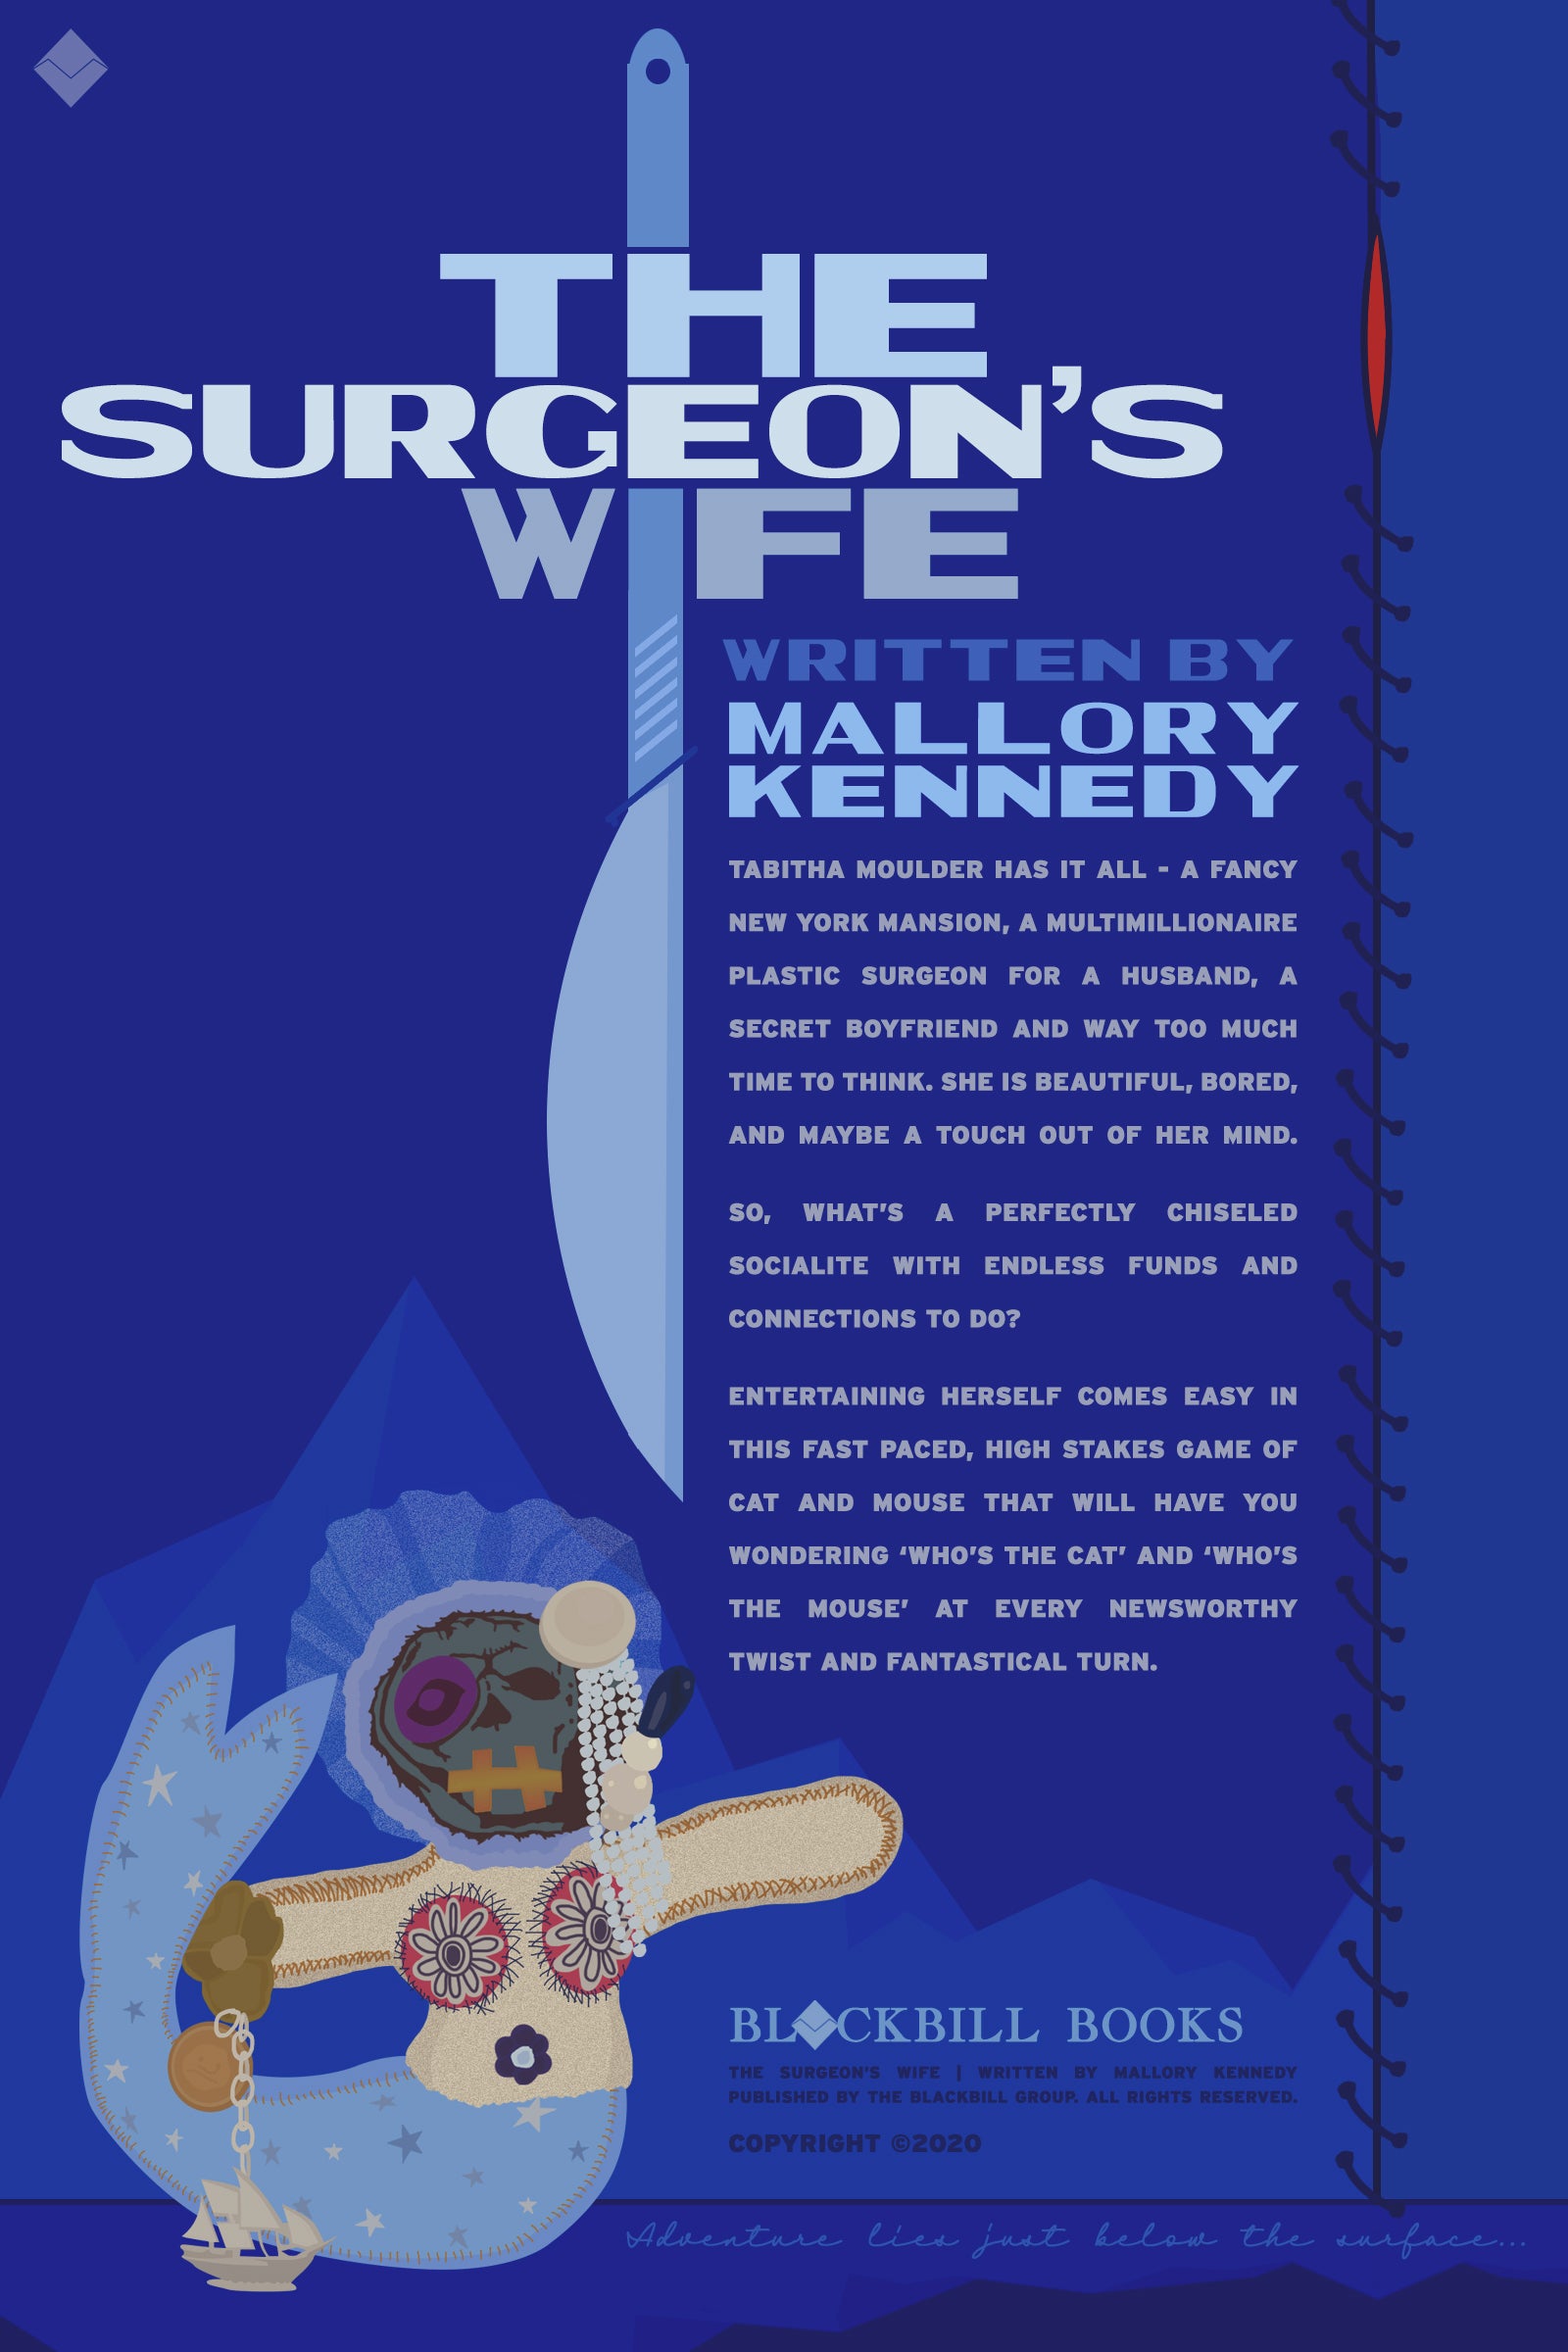 The Surgeon's Wife - Back of Book - debut novel by Mallory Kennedy